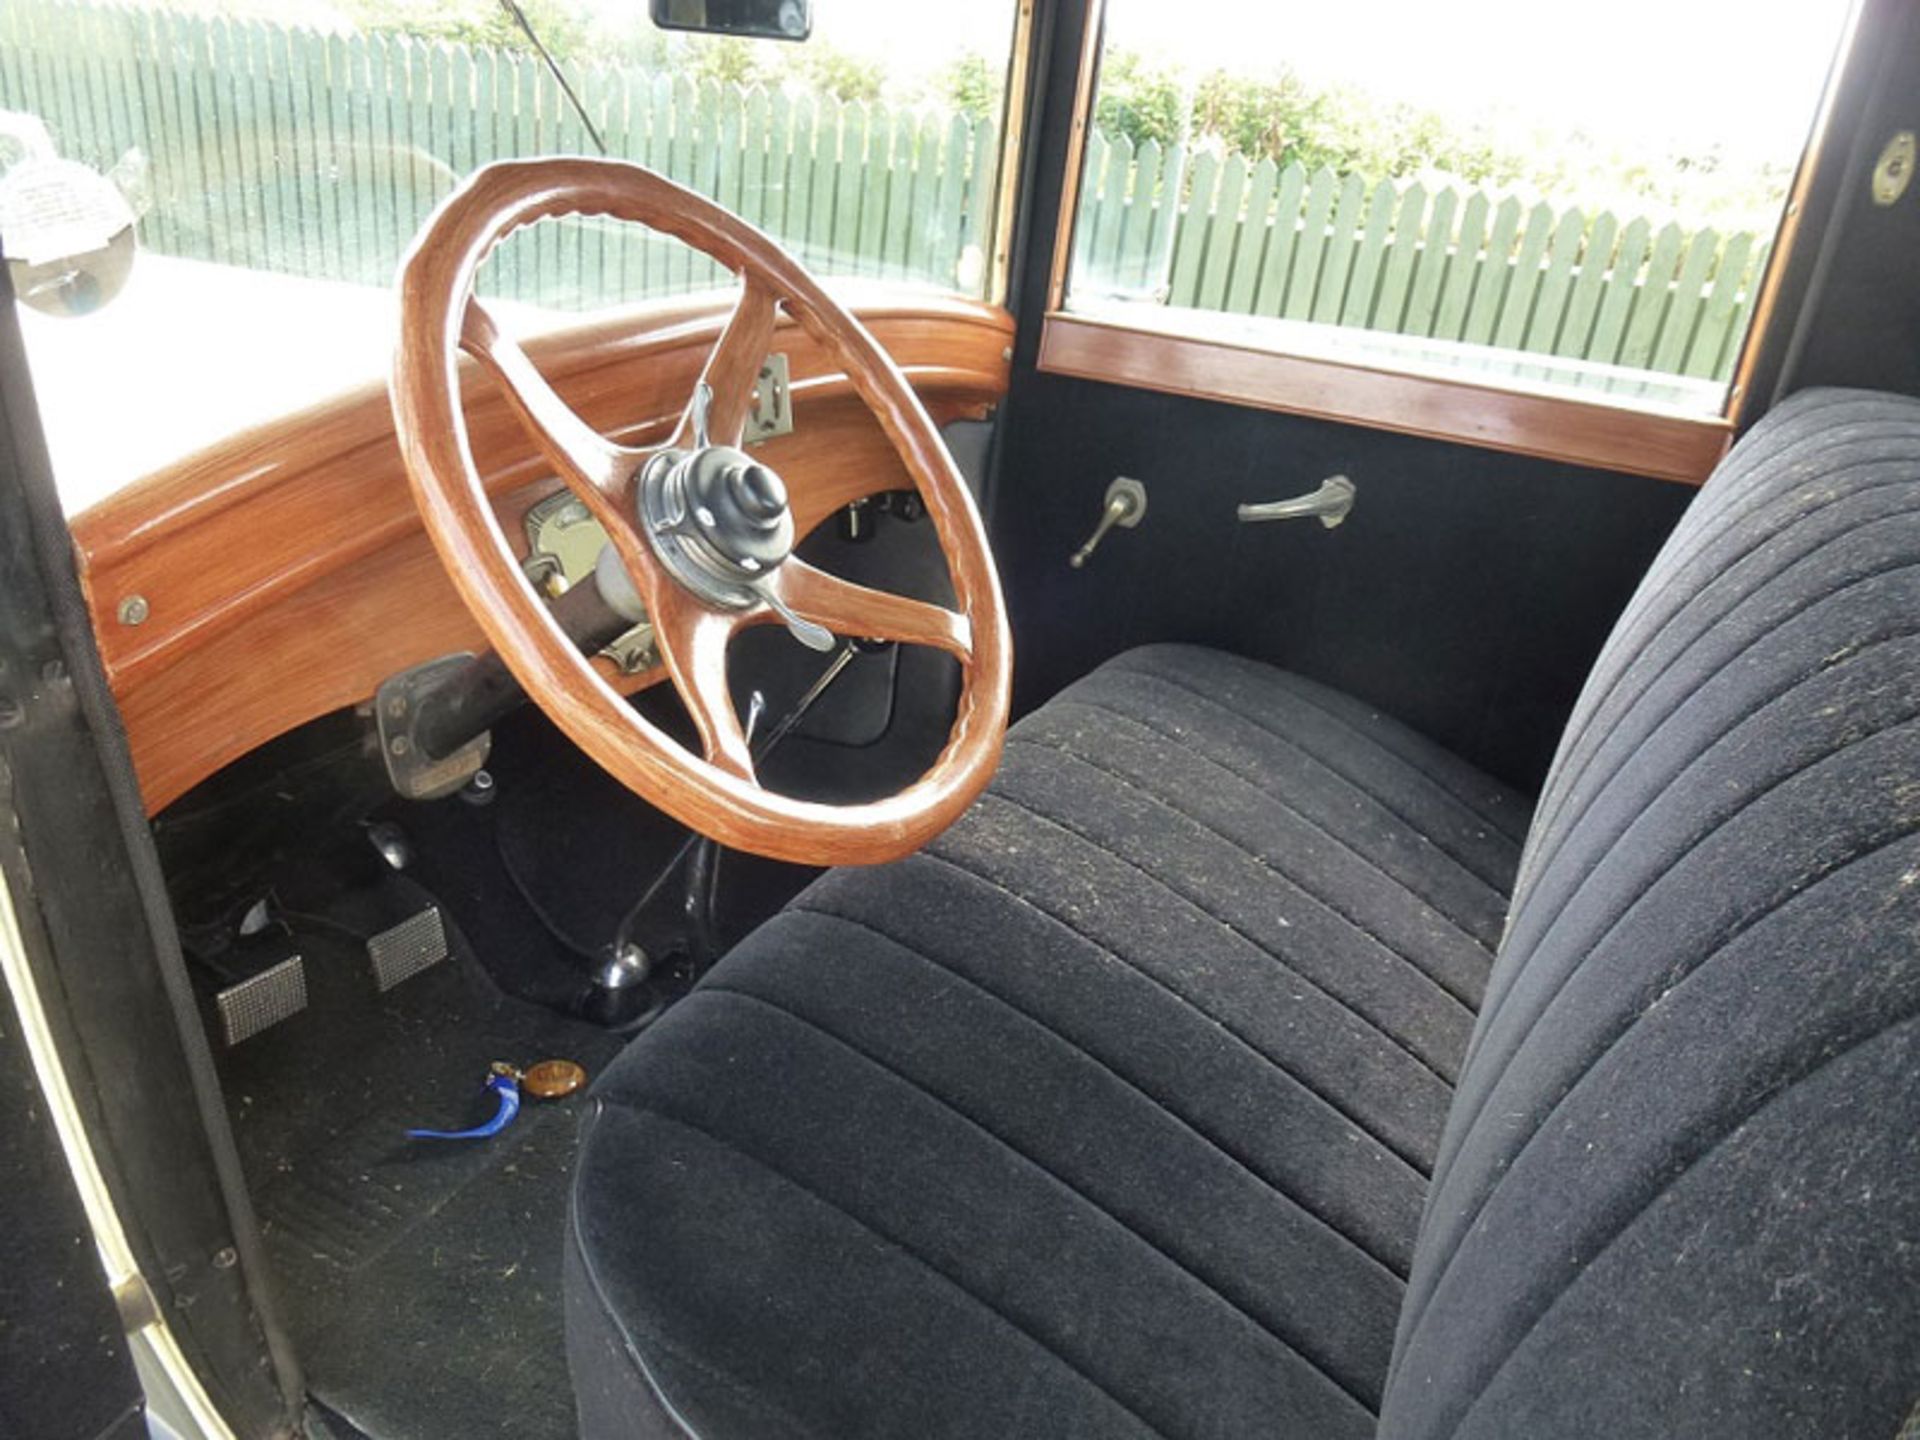 - California car restored in USA

- 8 cylinder 3945cc engine

- Rumble seat to rear compartment - Image 4 of 7